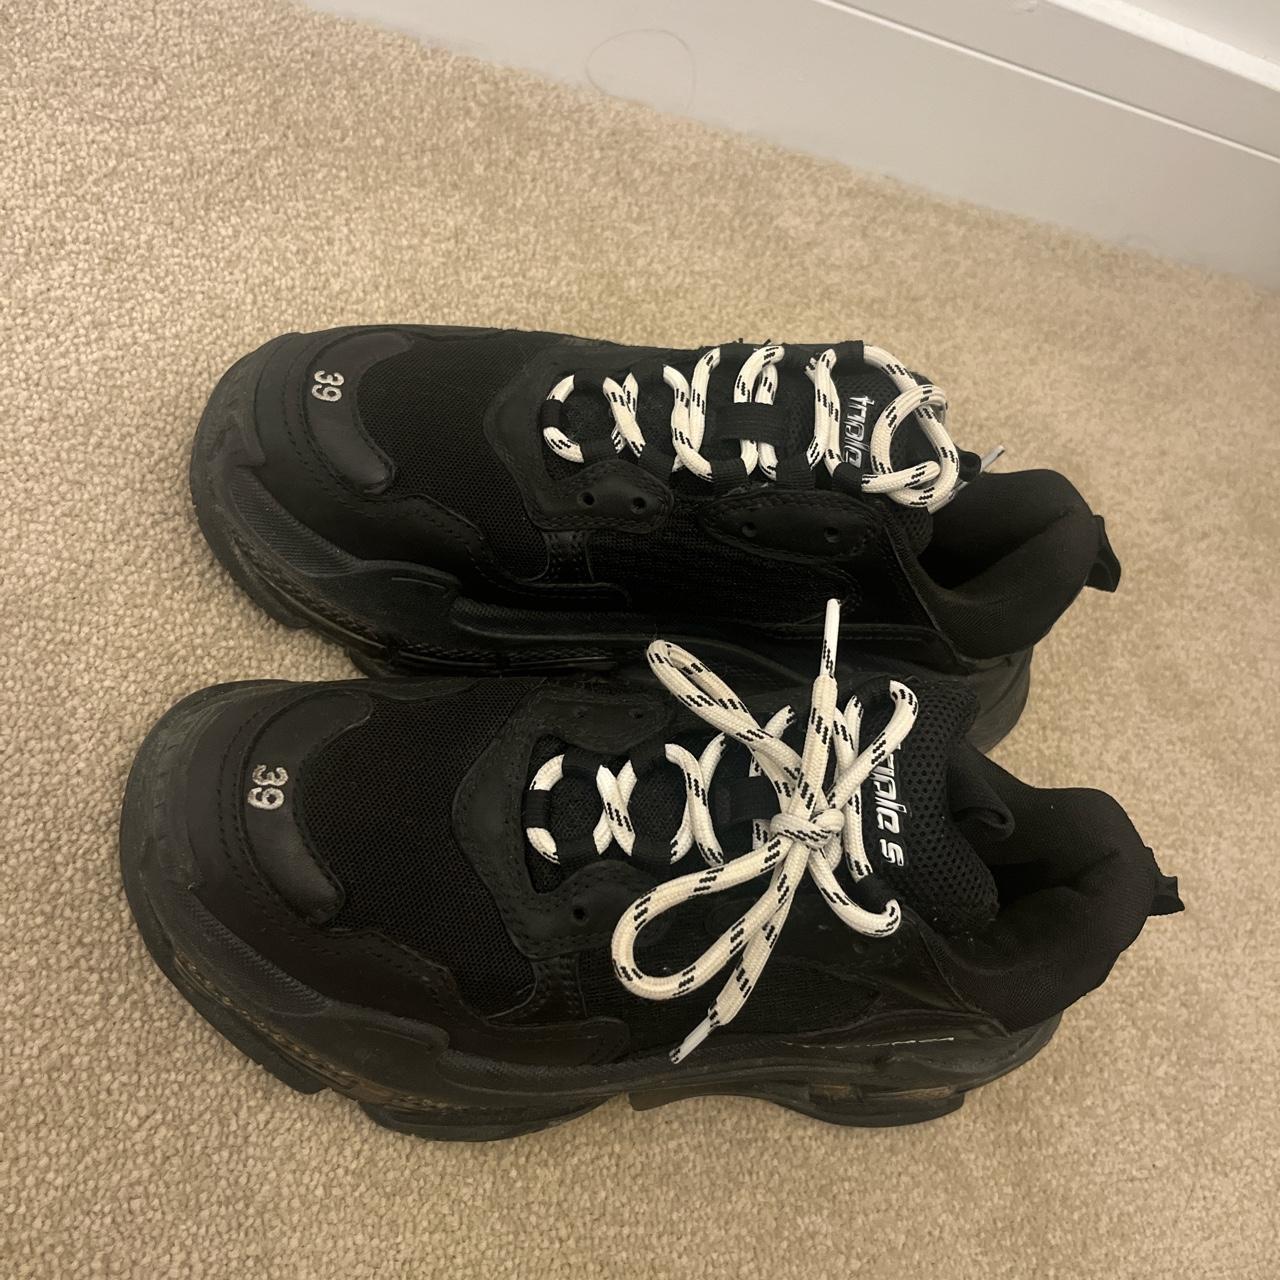 Balenciaga Triple S UK size 6 Worn once Comes with... - Depop